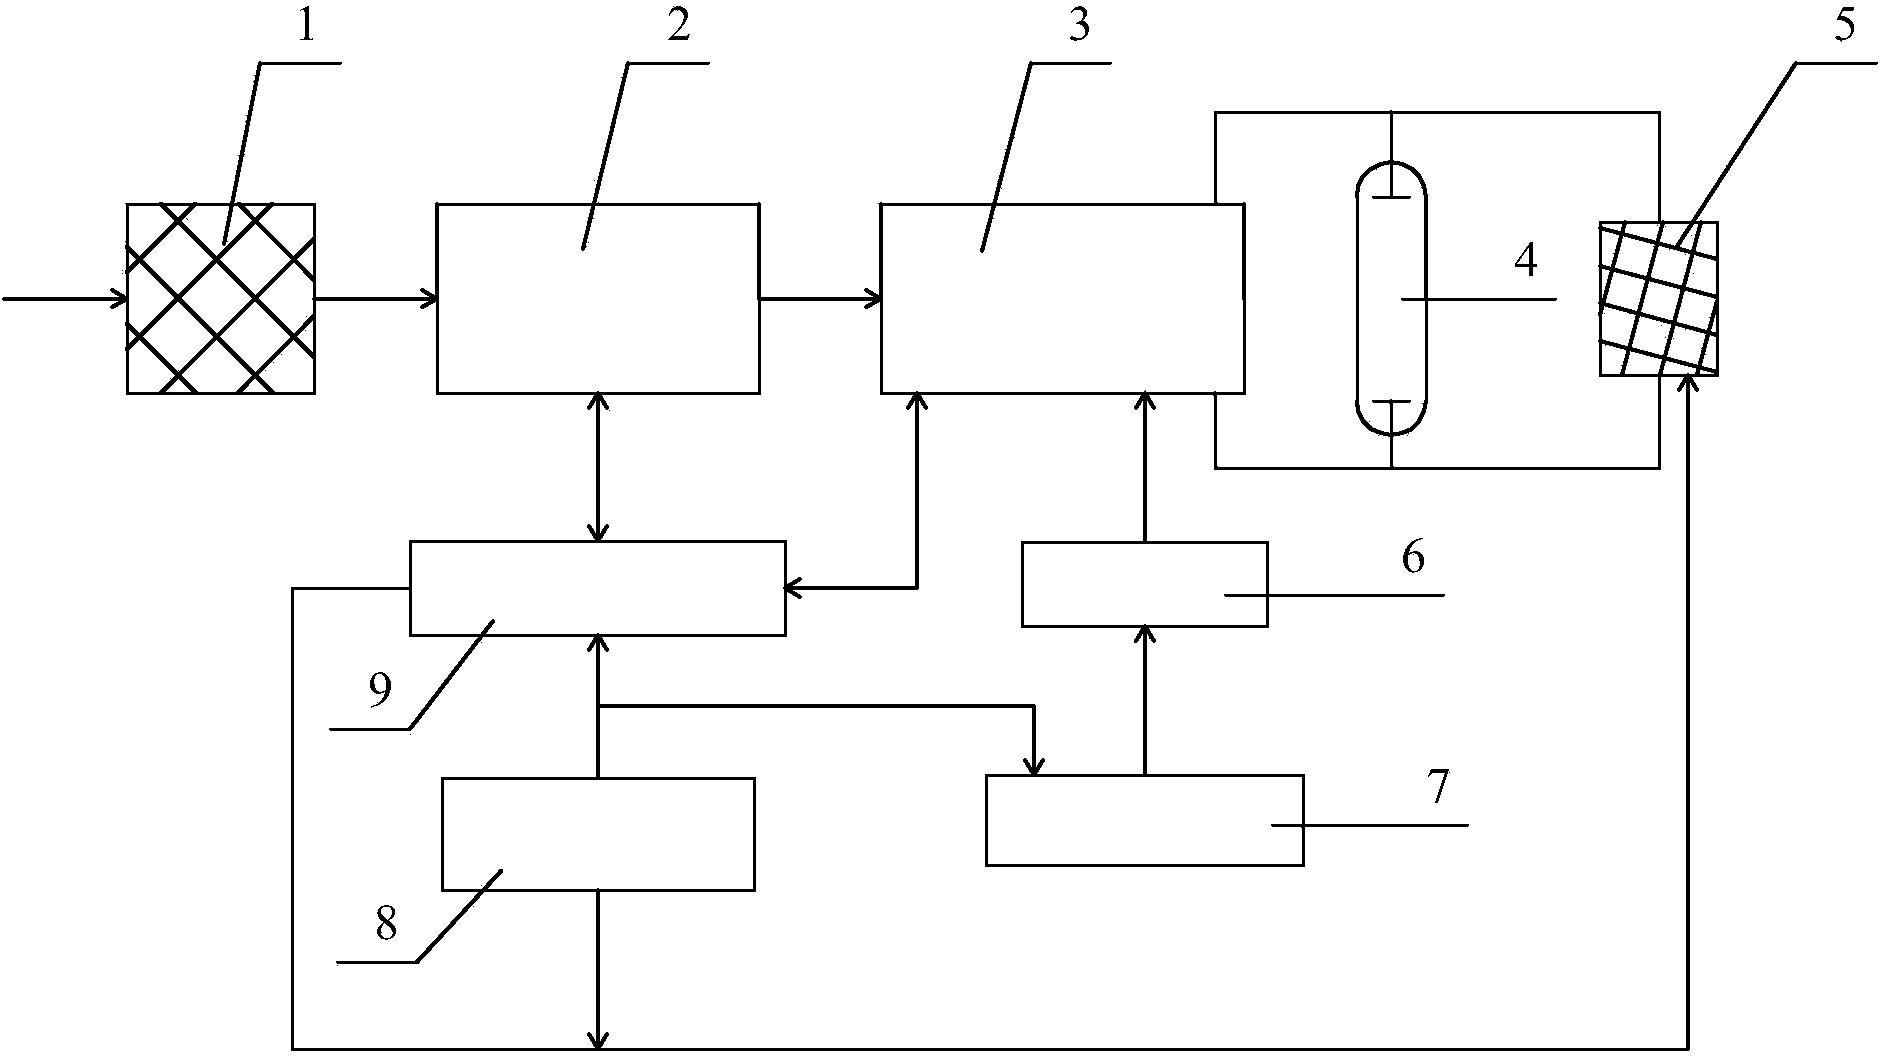 Electronic ballast of high voltage sodium lamp